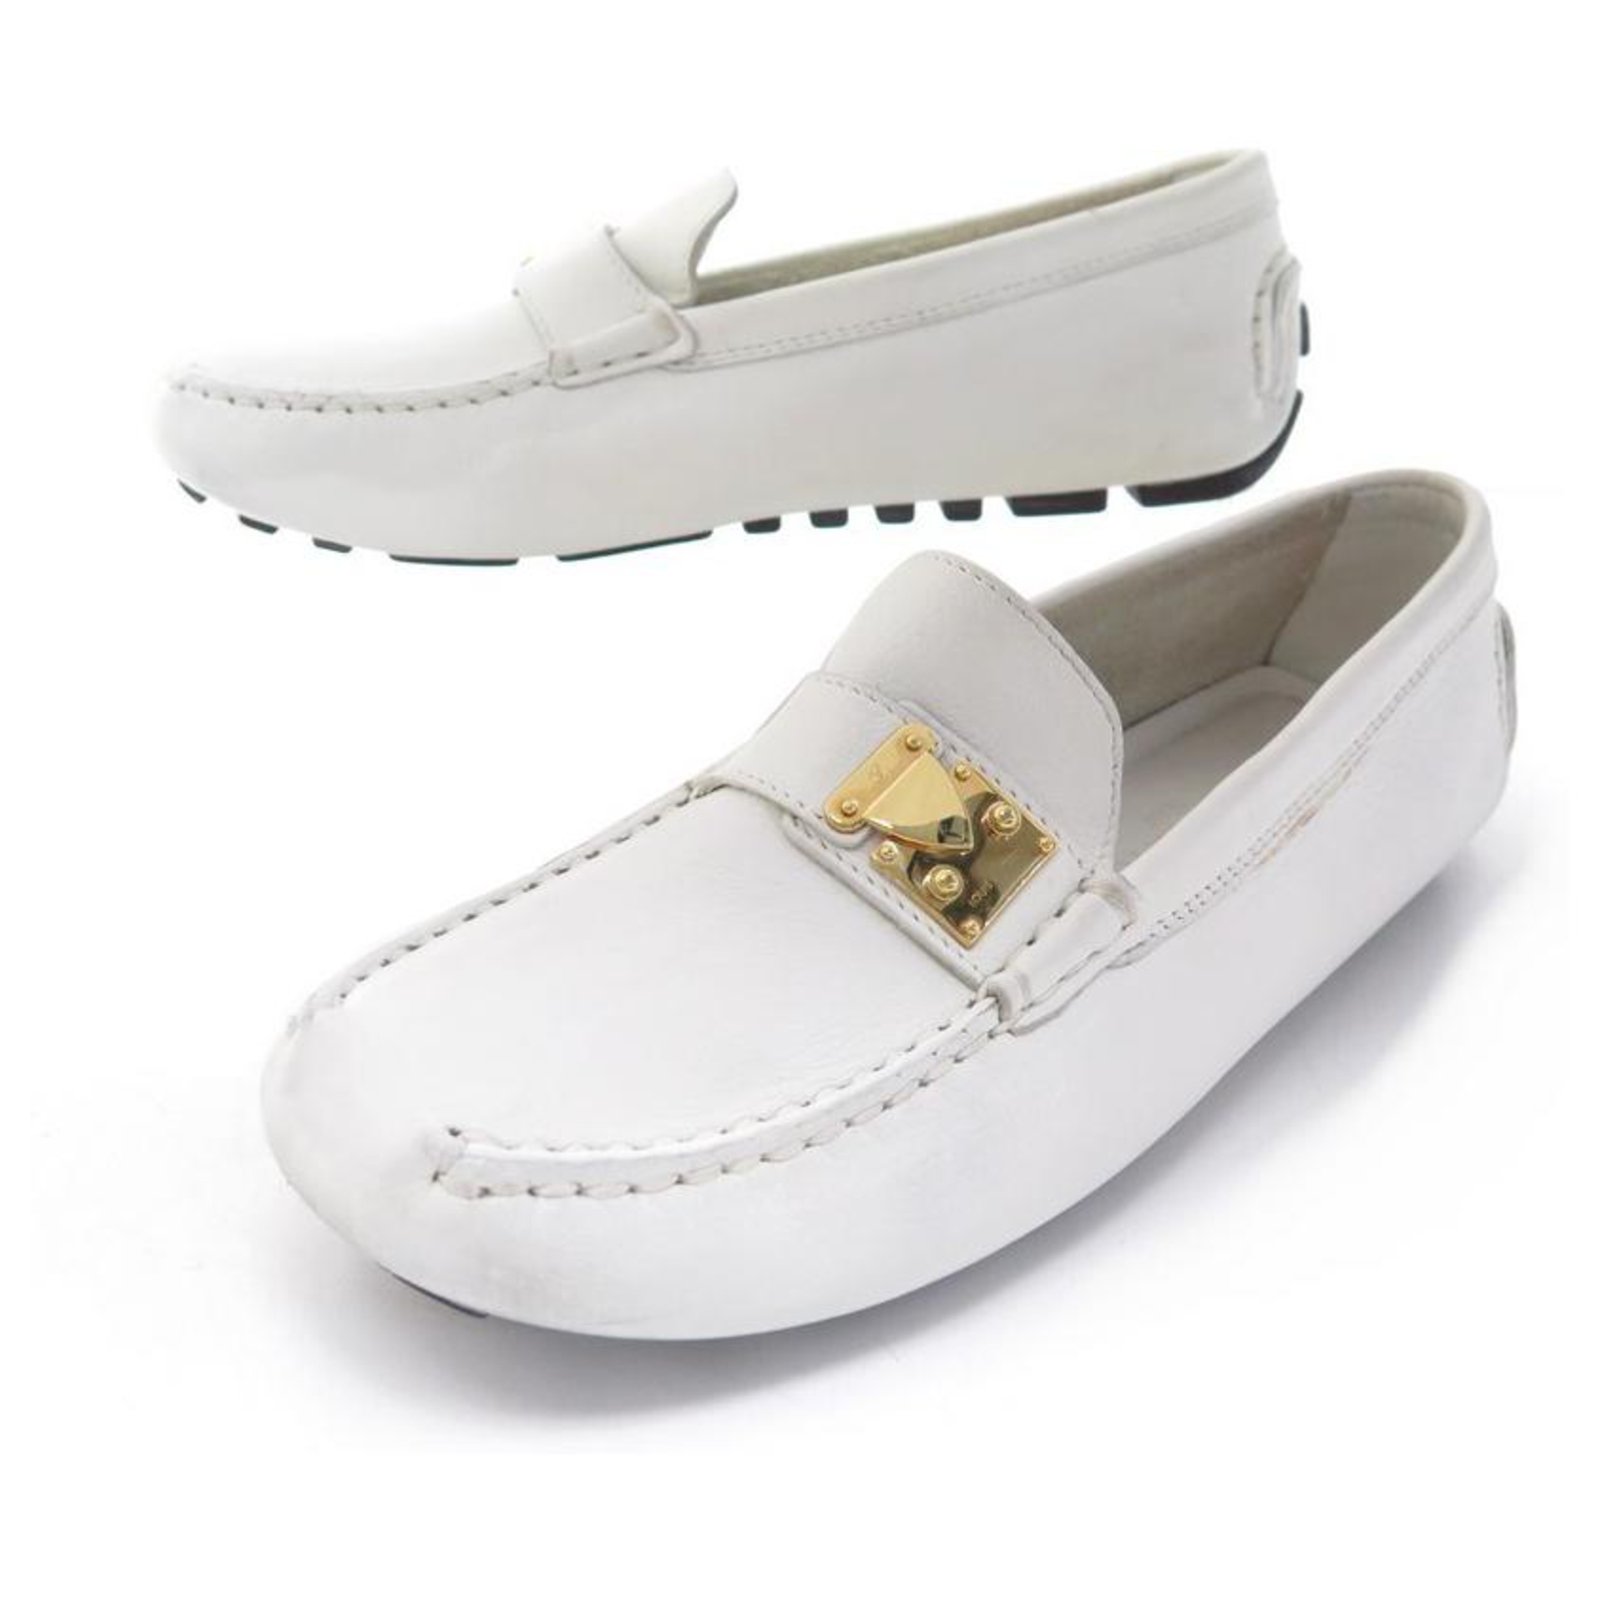 loafer shoes louis